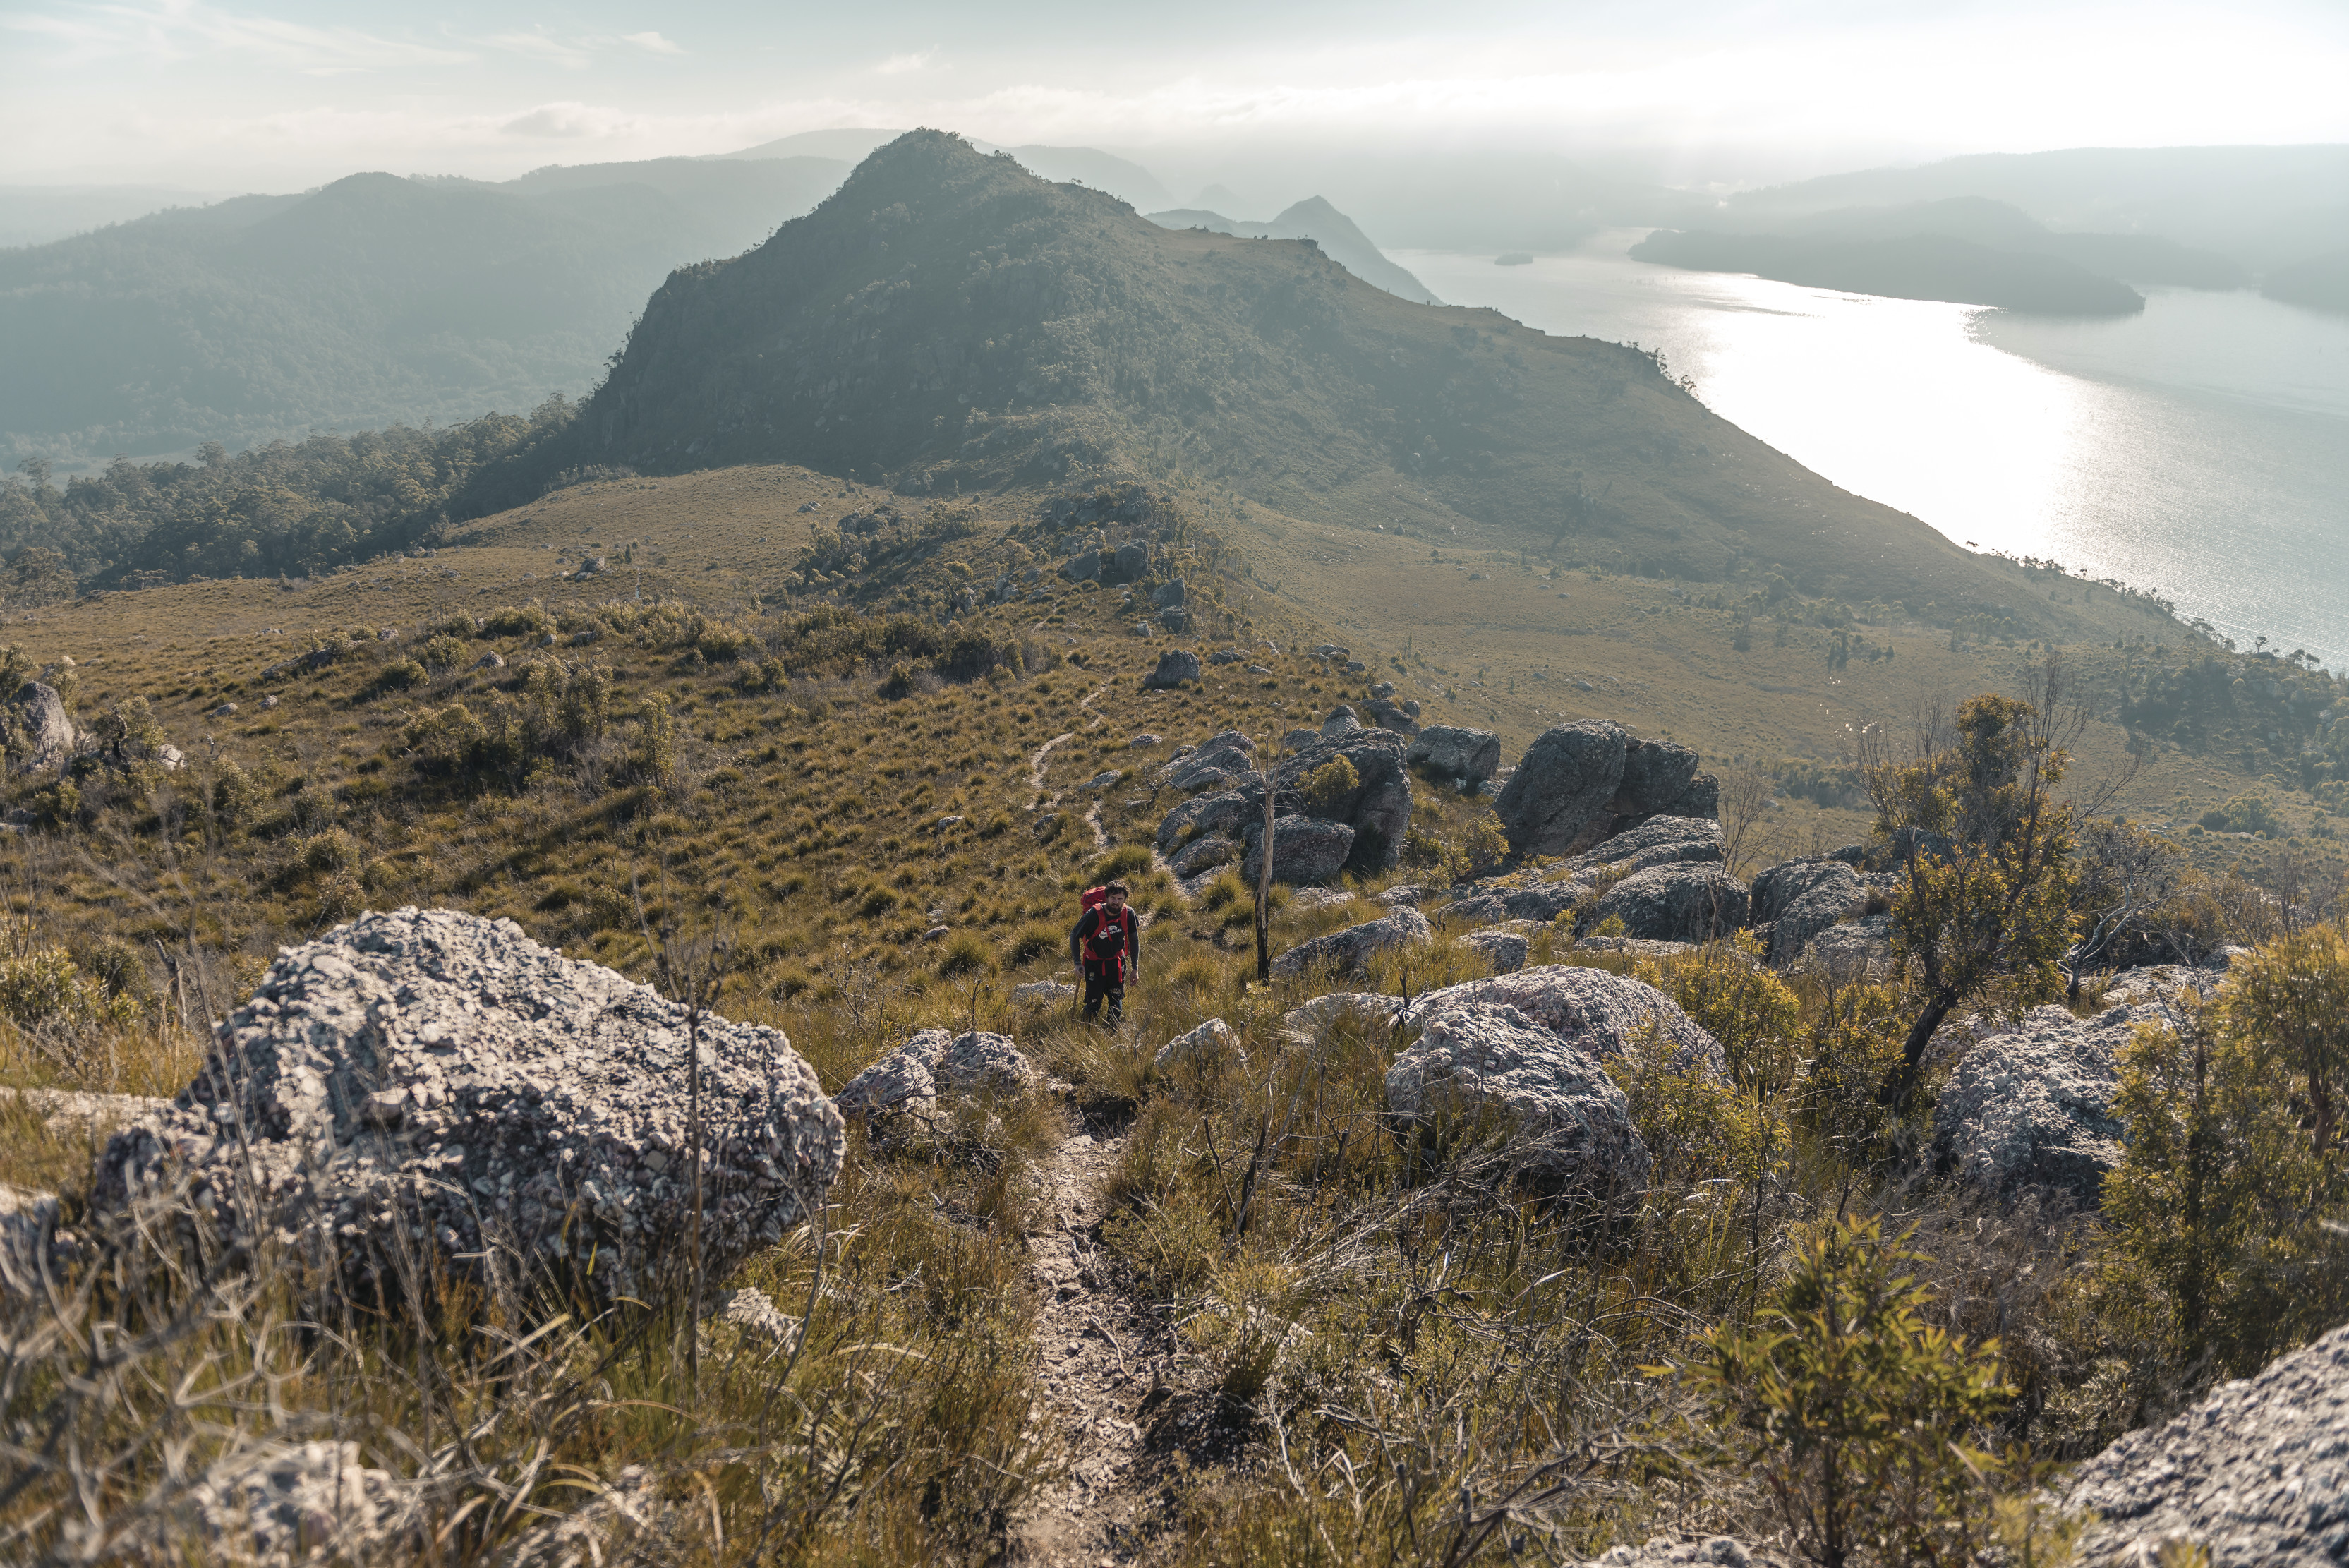 A single hiker walks along the track at Mt Farrell, water and mountain views in the background.